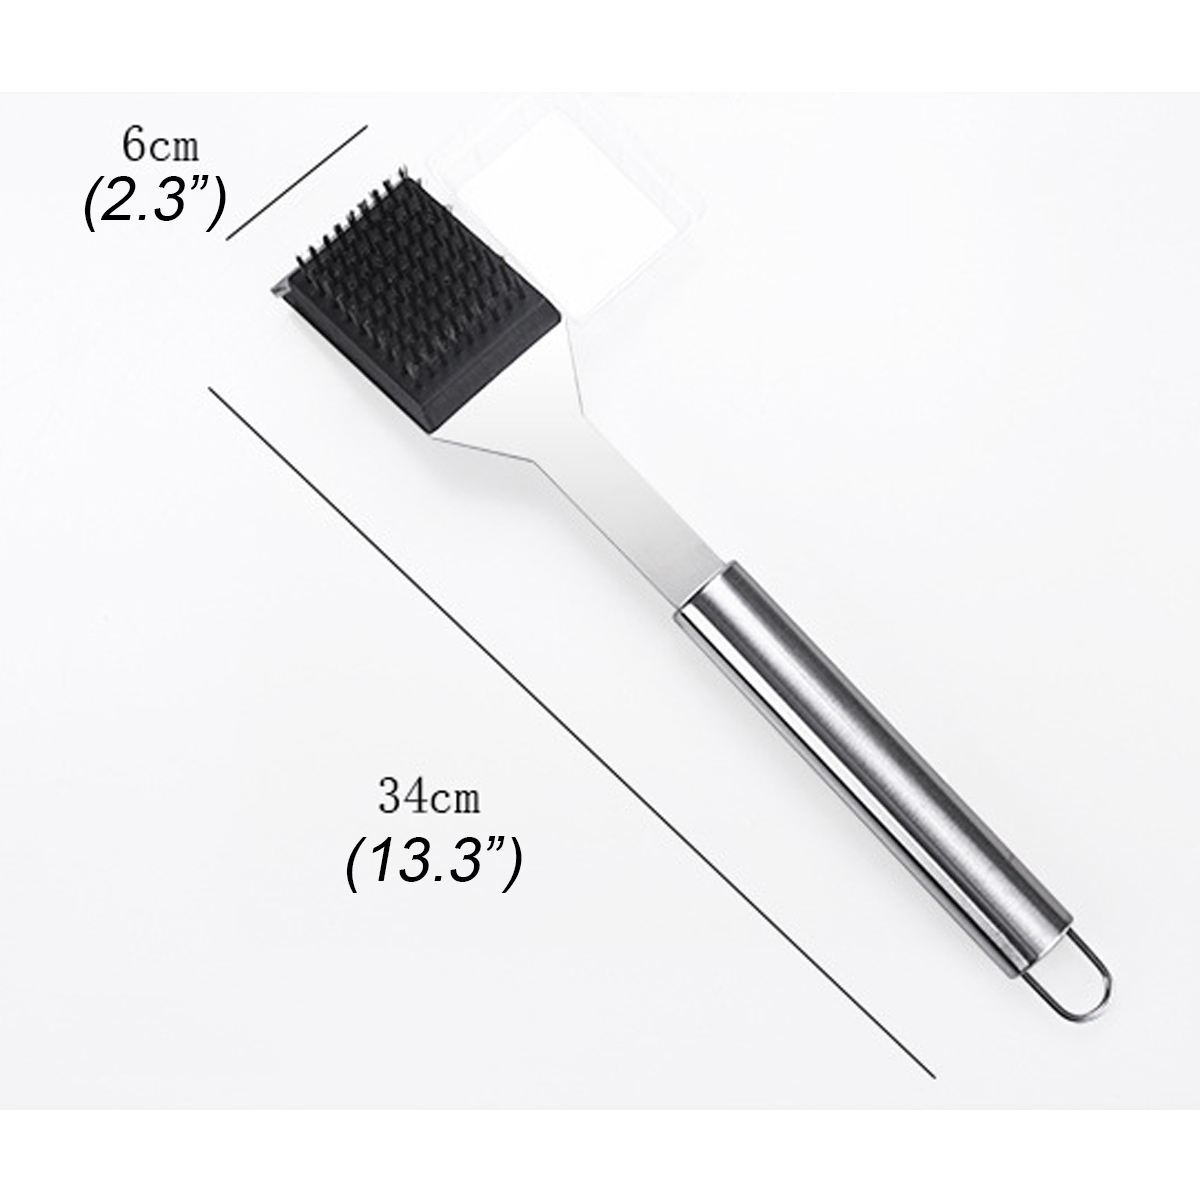 Stainless-Steel-BBQ-Tools-Set-Barbecue-Grilling-Utensil-Accessories-Camping-Outdoor-Cooking-1676473-9